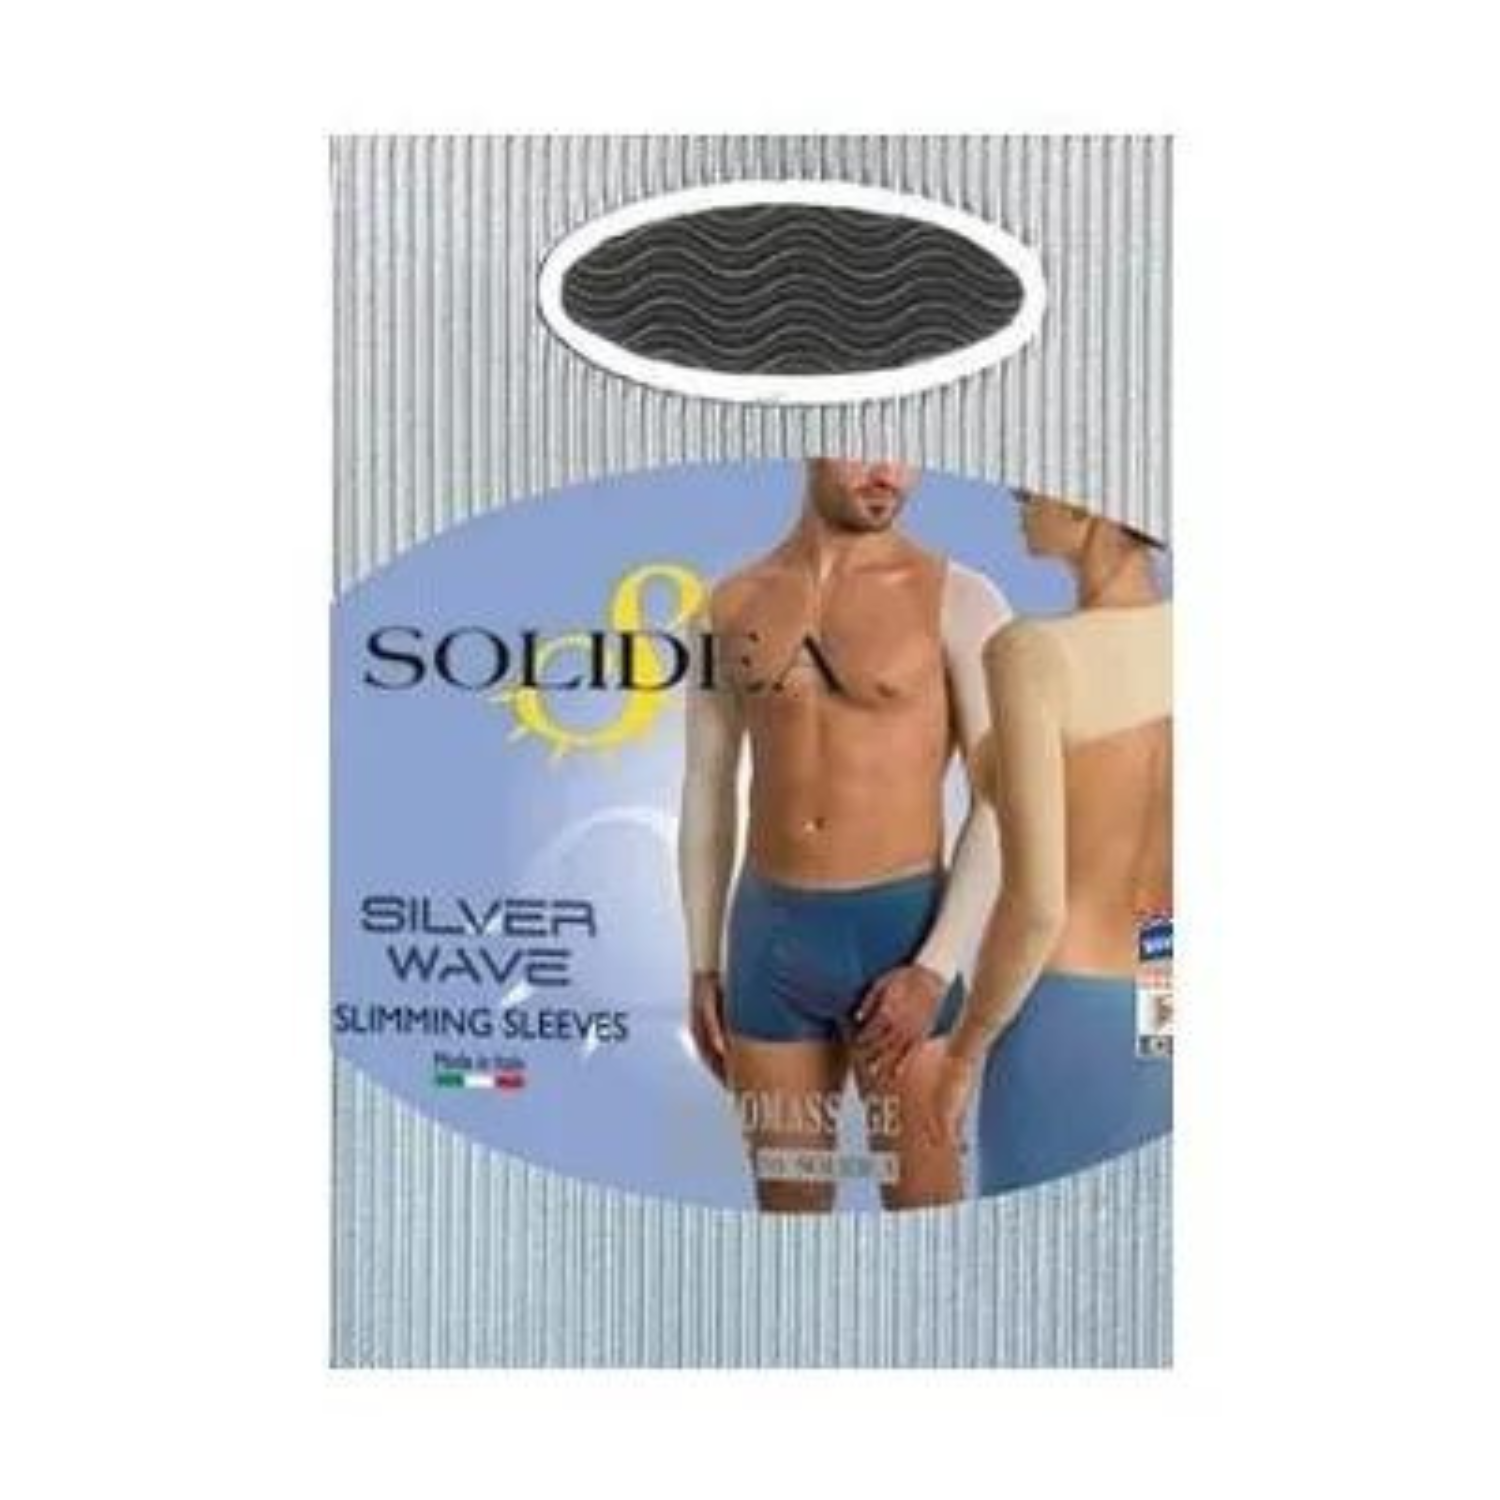 Solidea Silver Wave Slimming Slimming Sleeves 4XL Noisette